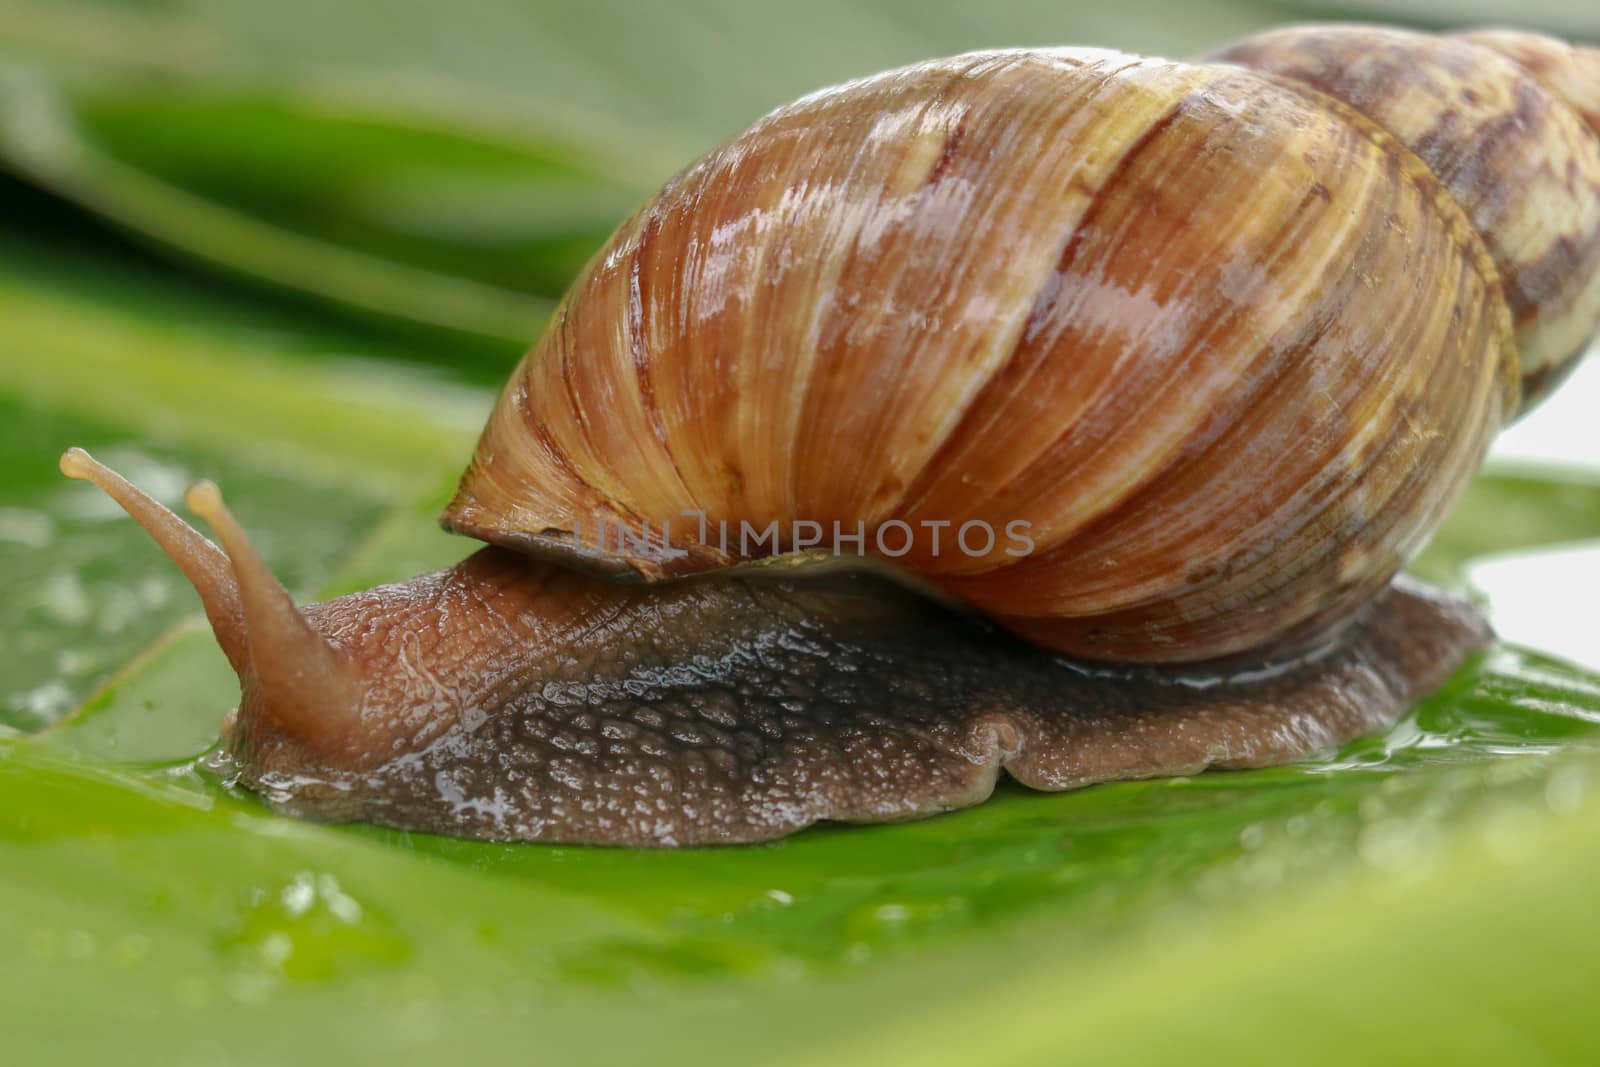 Side view of Achatina Fulica between water drops. A large adult snail climbs on a wet banana leaf in a tropical rainforest. Giant snail crawling.